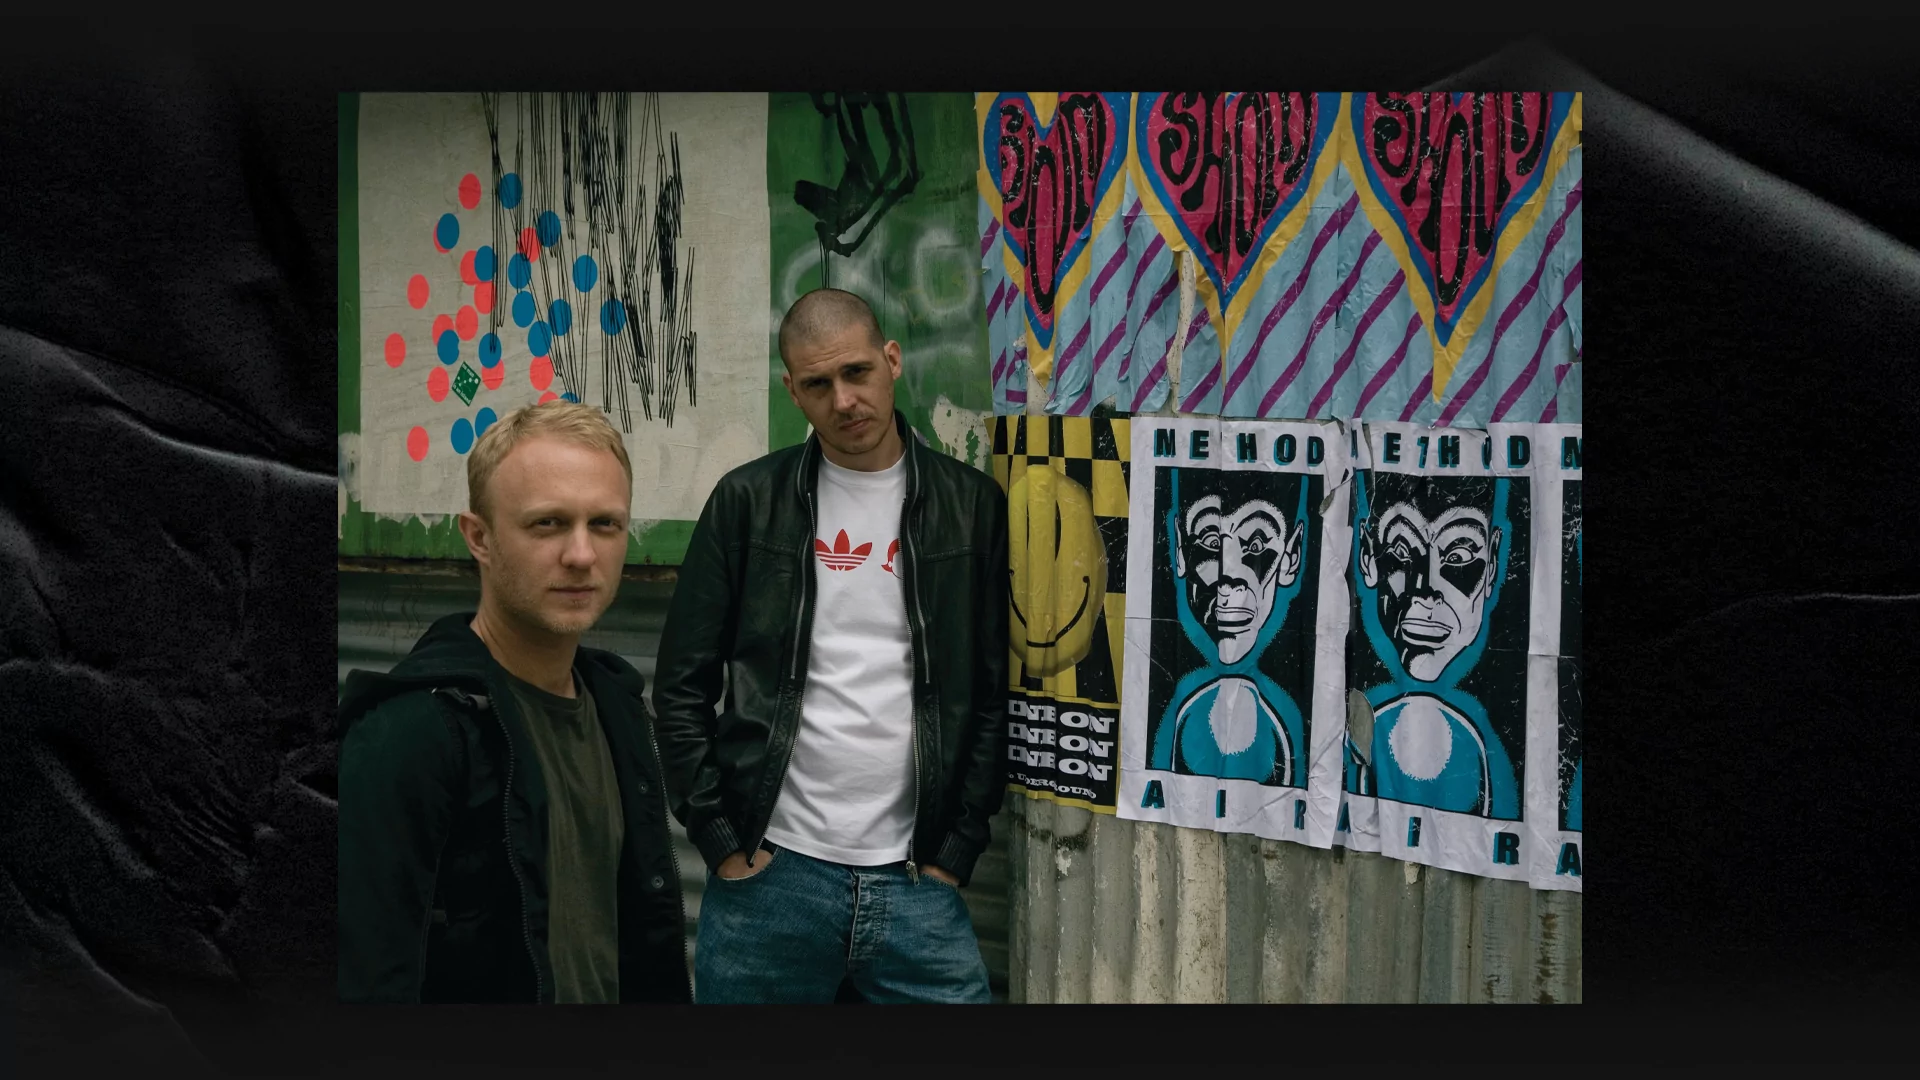  Max Reich (left) and Simon Marlin (right) of Shapeshifters pose next to graffiti and posters